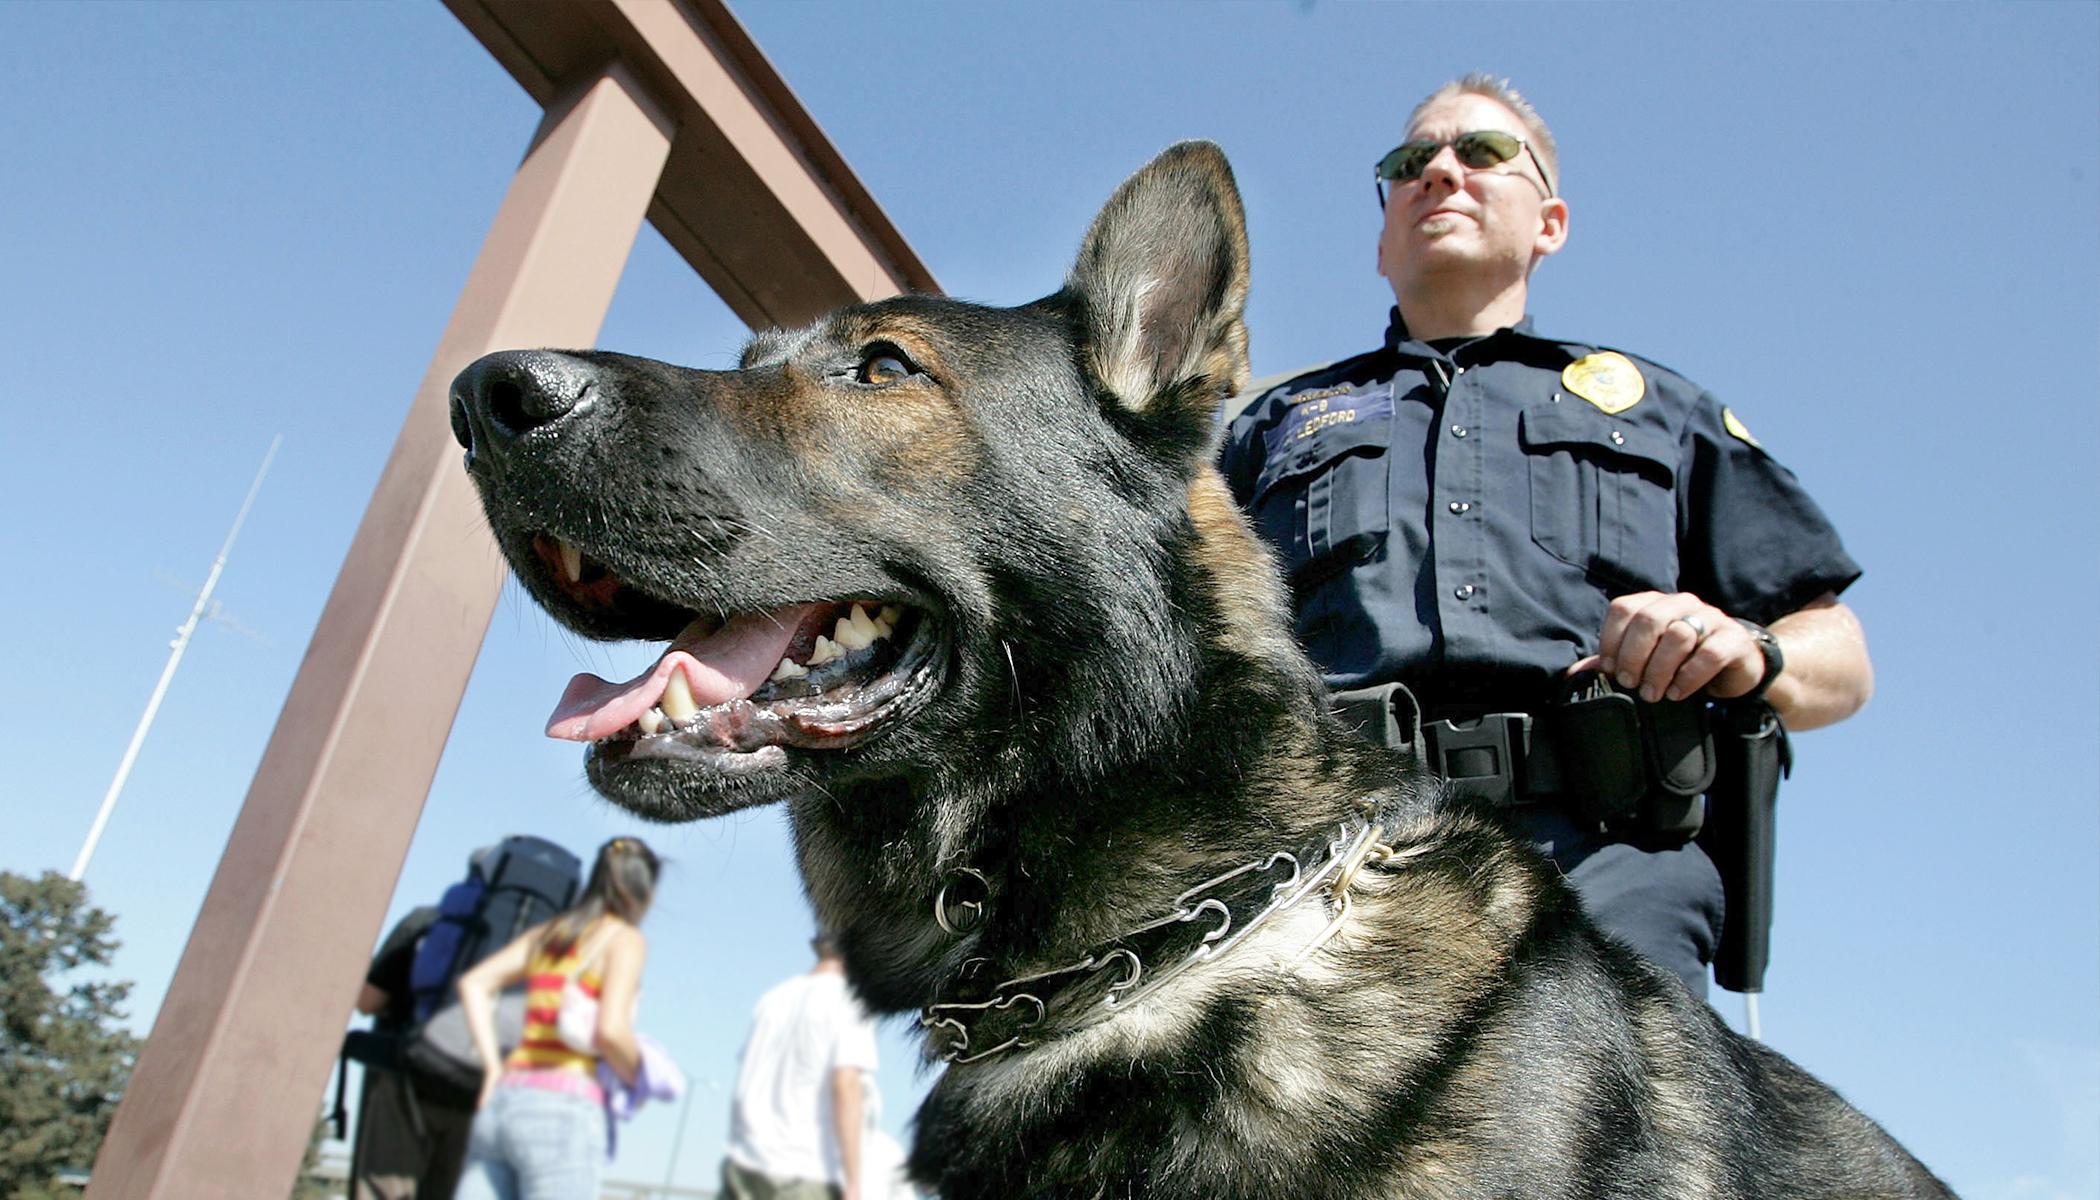 City Questions Donation of Police Dogs From Company With Same Name as Hitler’s Bunker